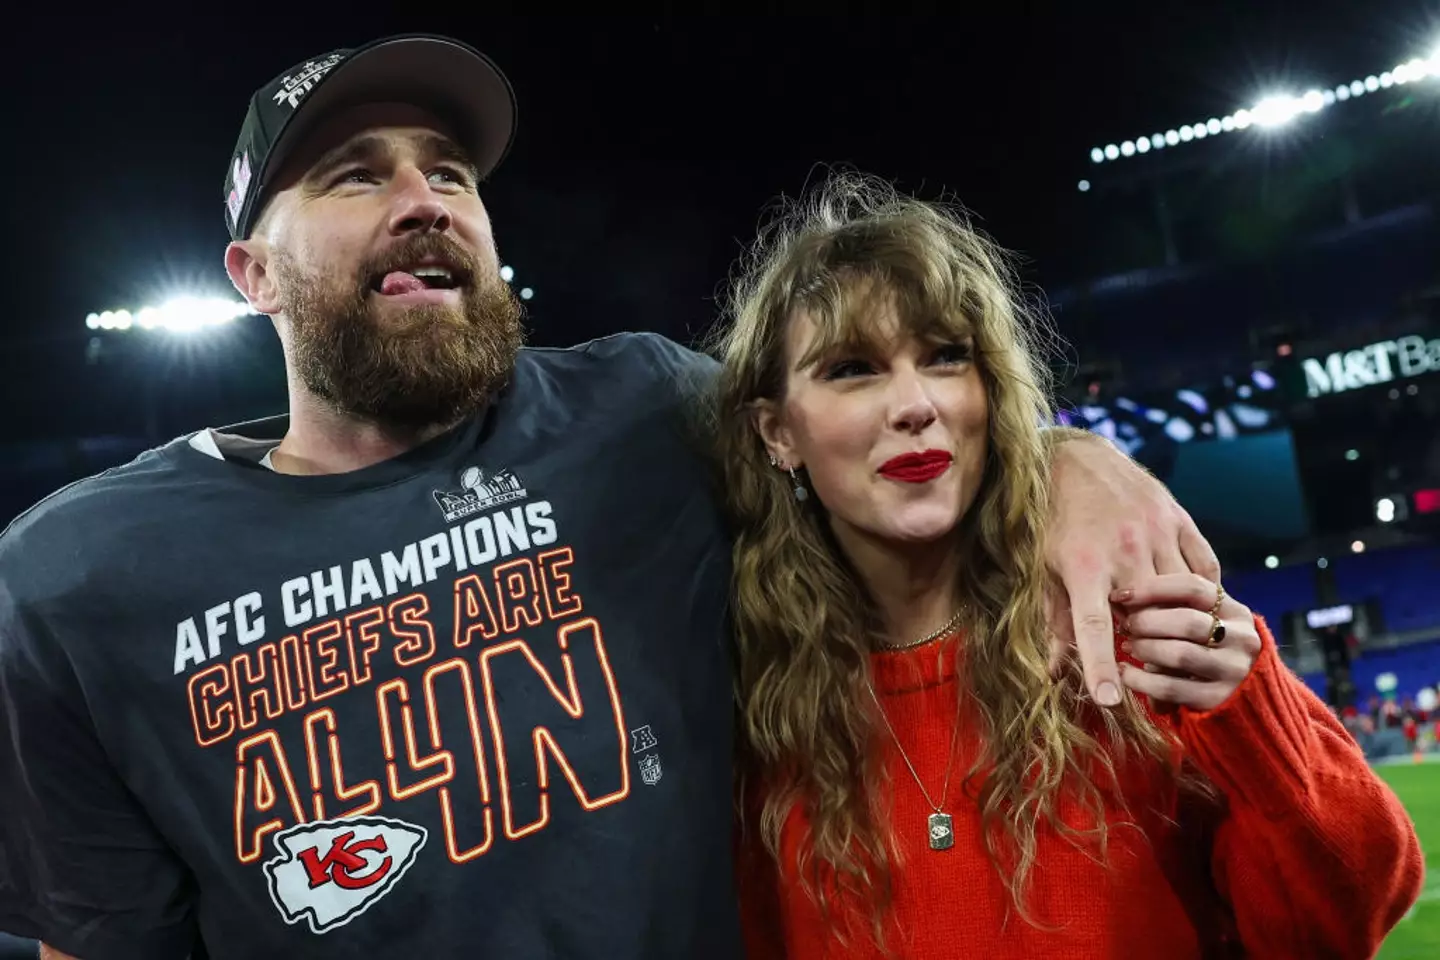 The romance between Chiefs star tight end Travis Kelce and pop superstar Taylor Swift might be helping drive interest in this Super Bowl.